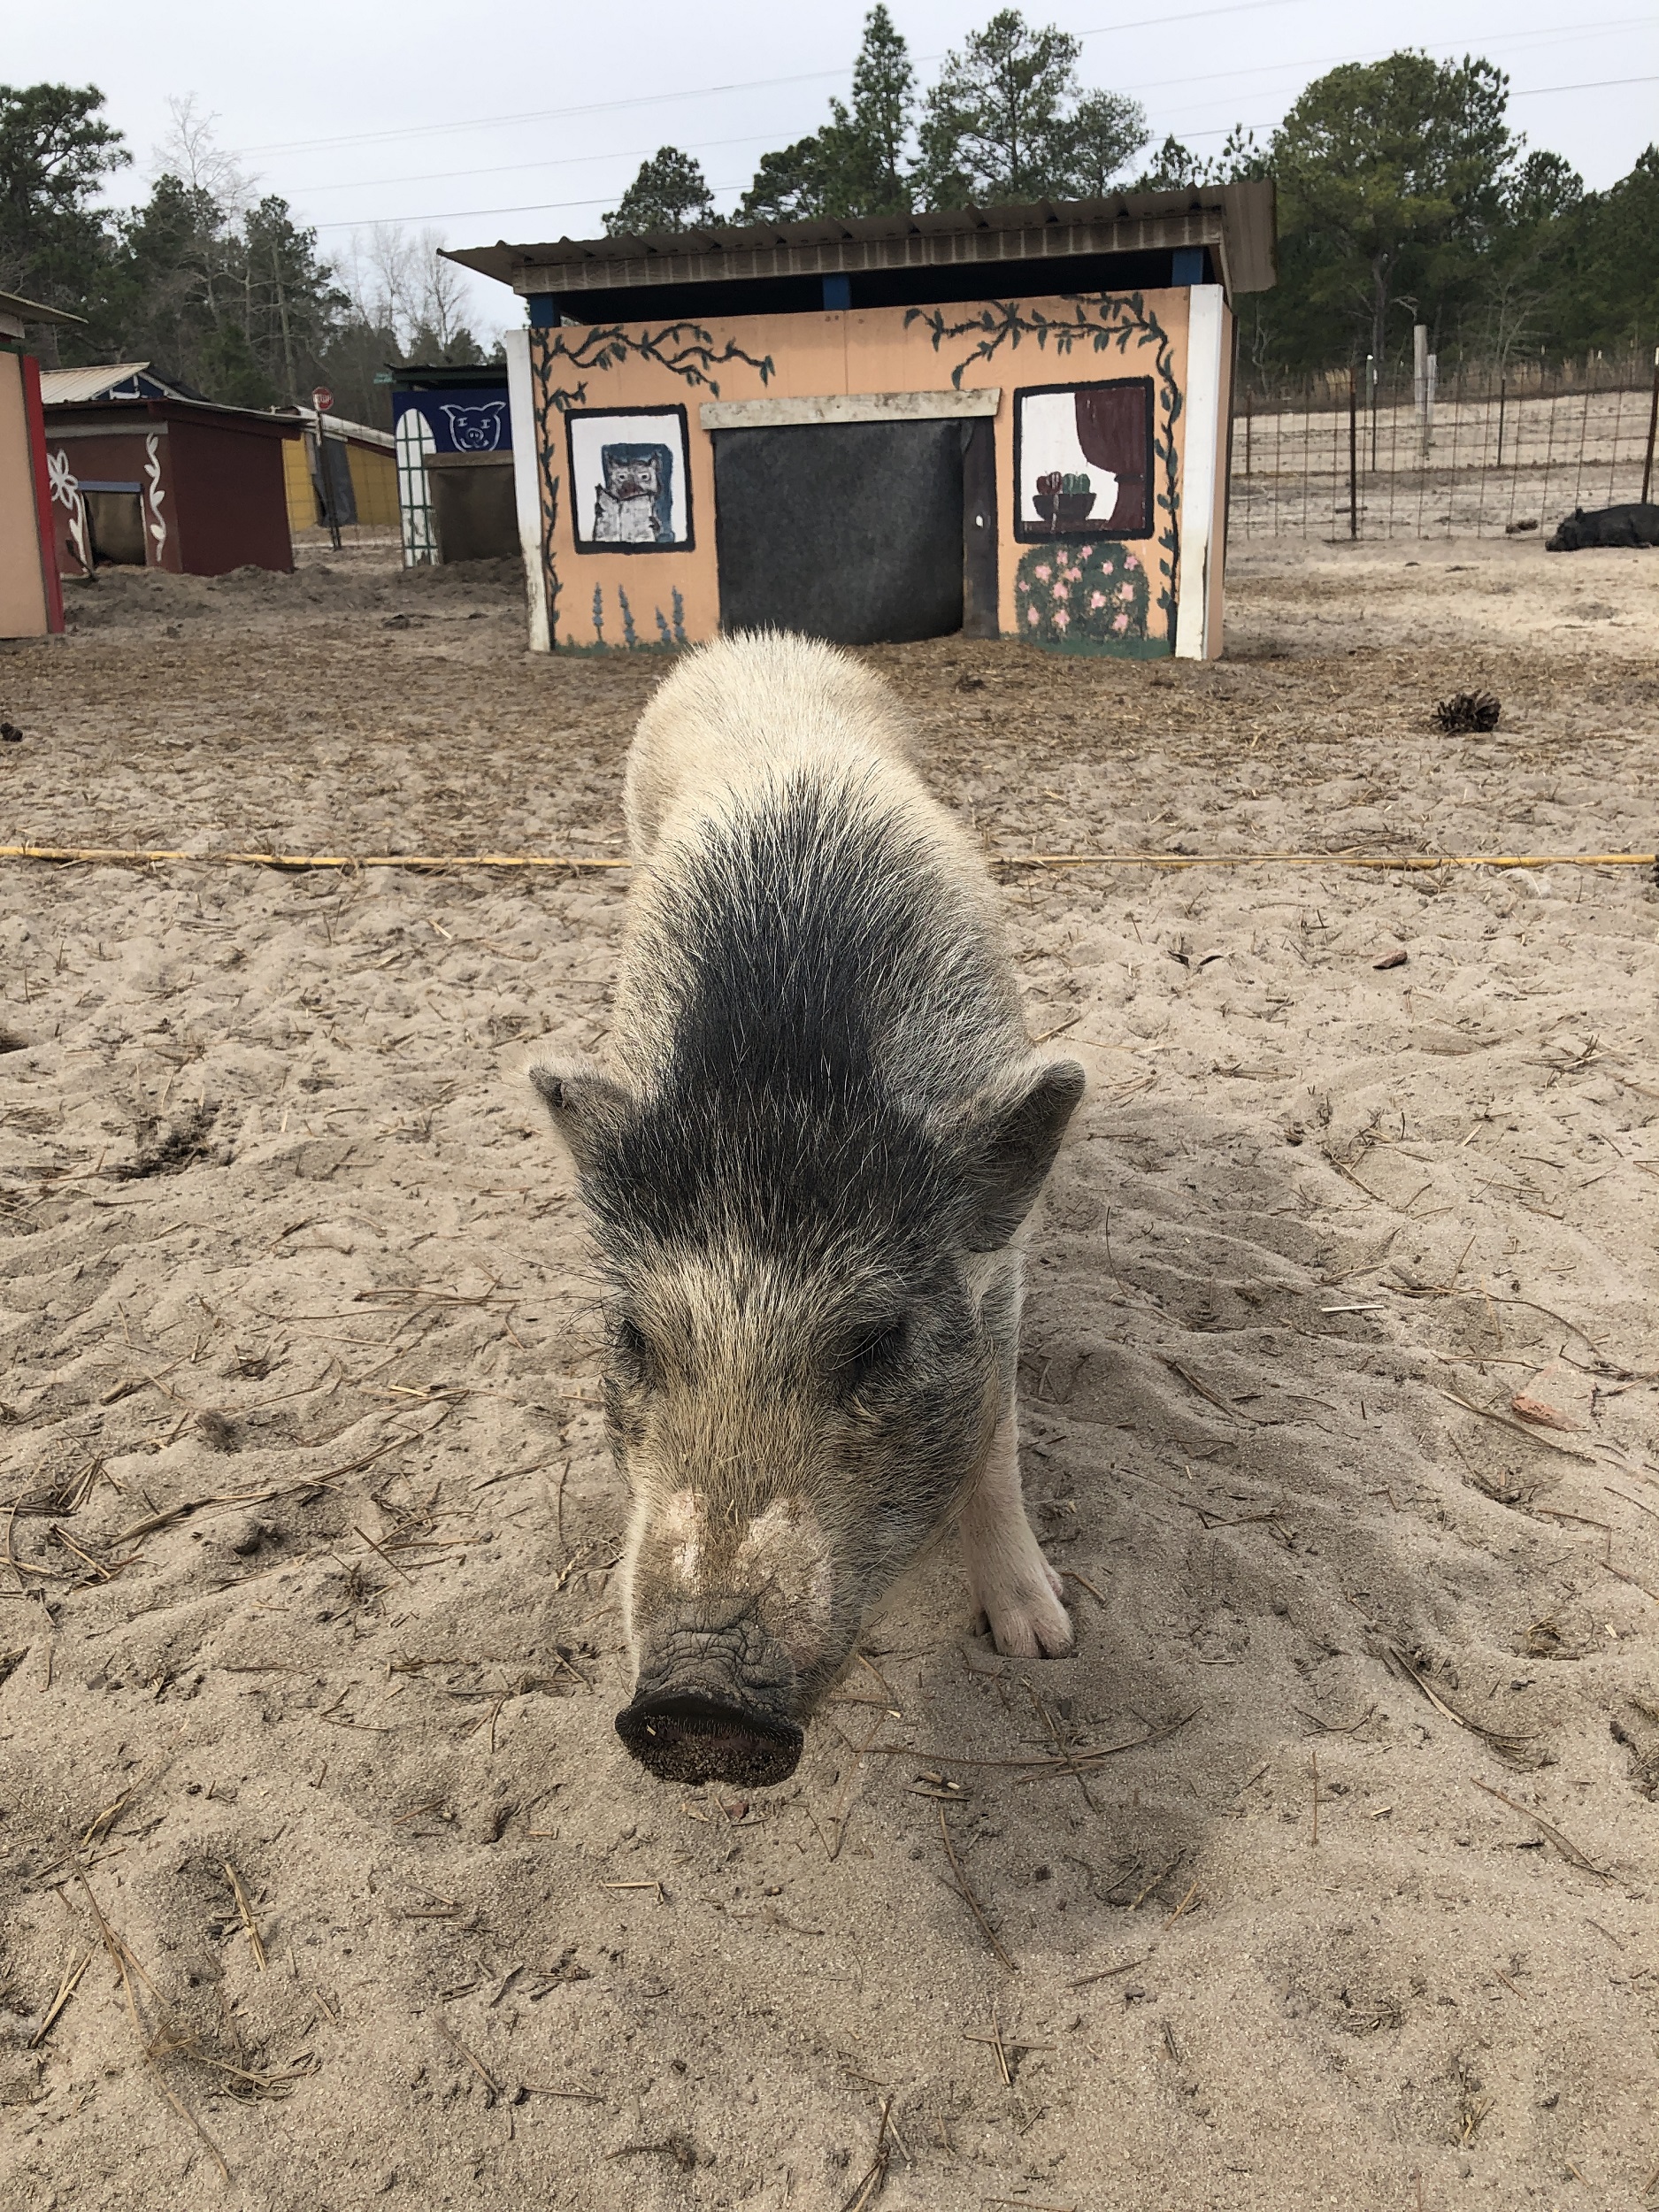 Pig and Shelter at Cotton Branch Farm Sanctuary in South Carolina